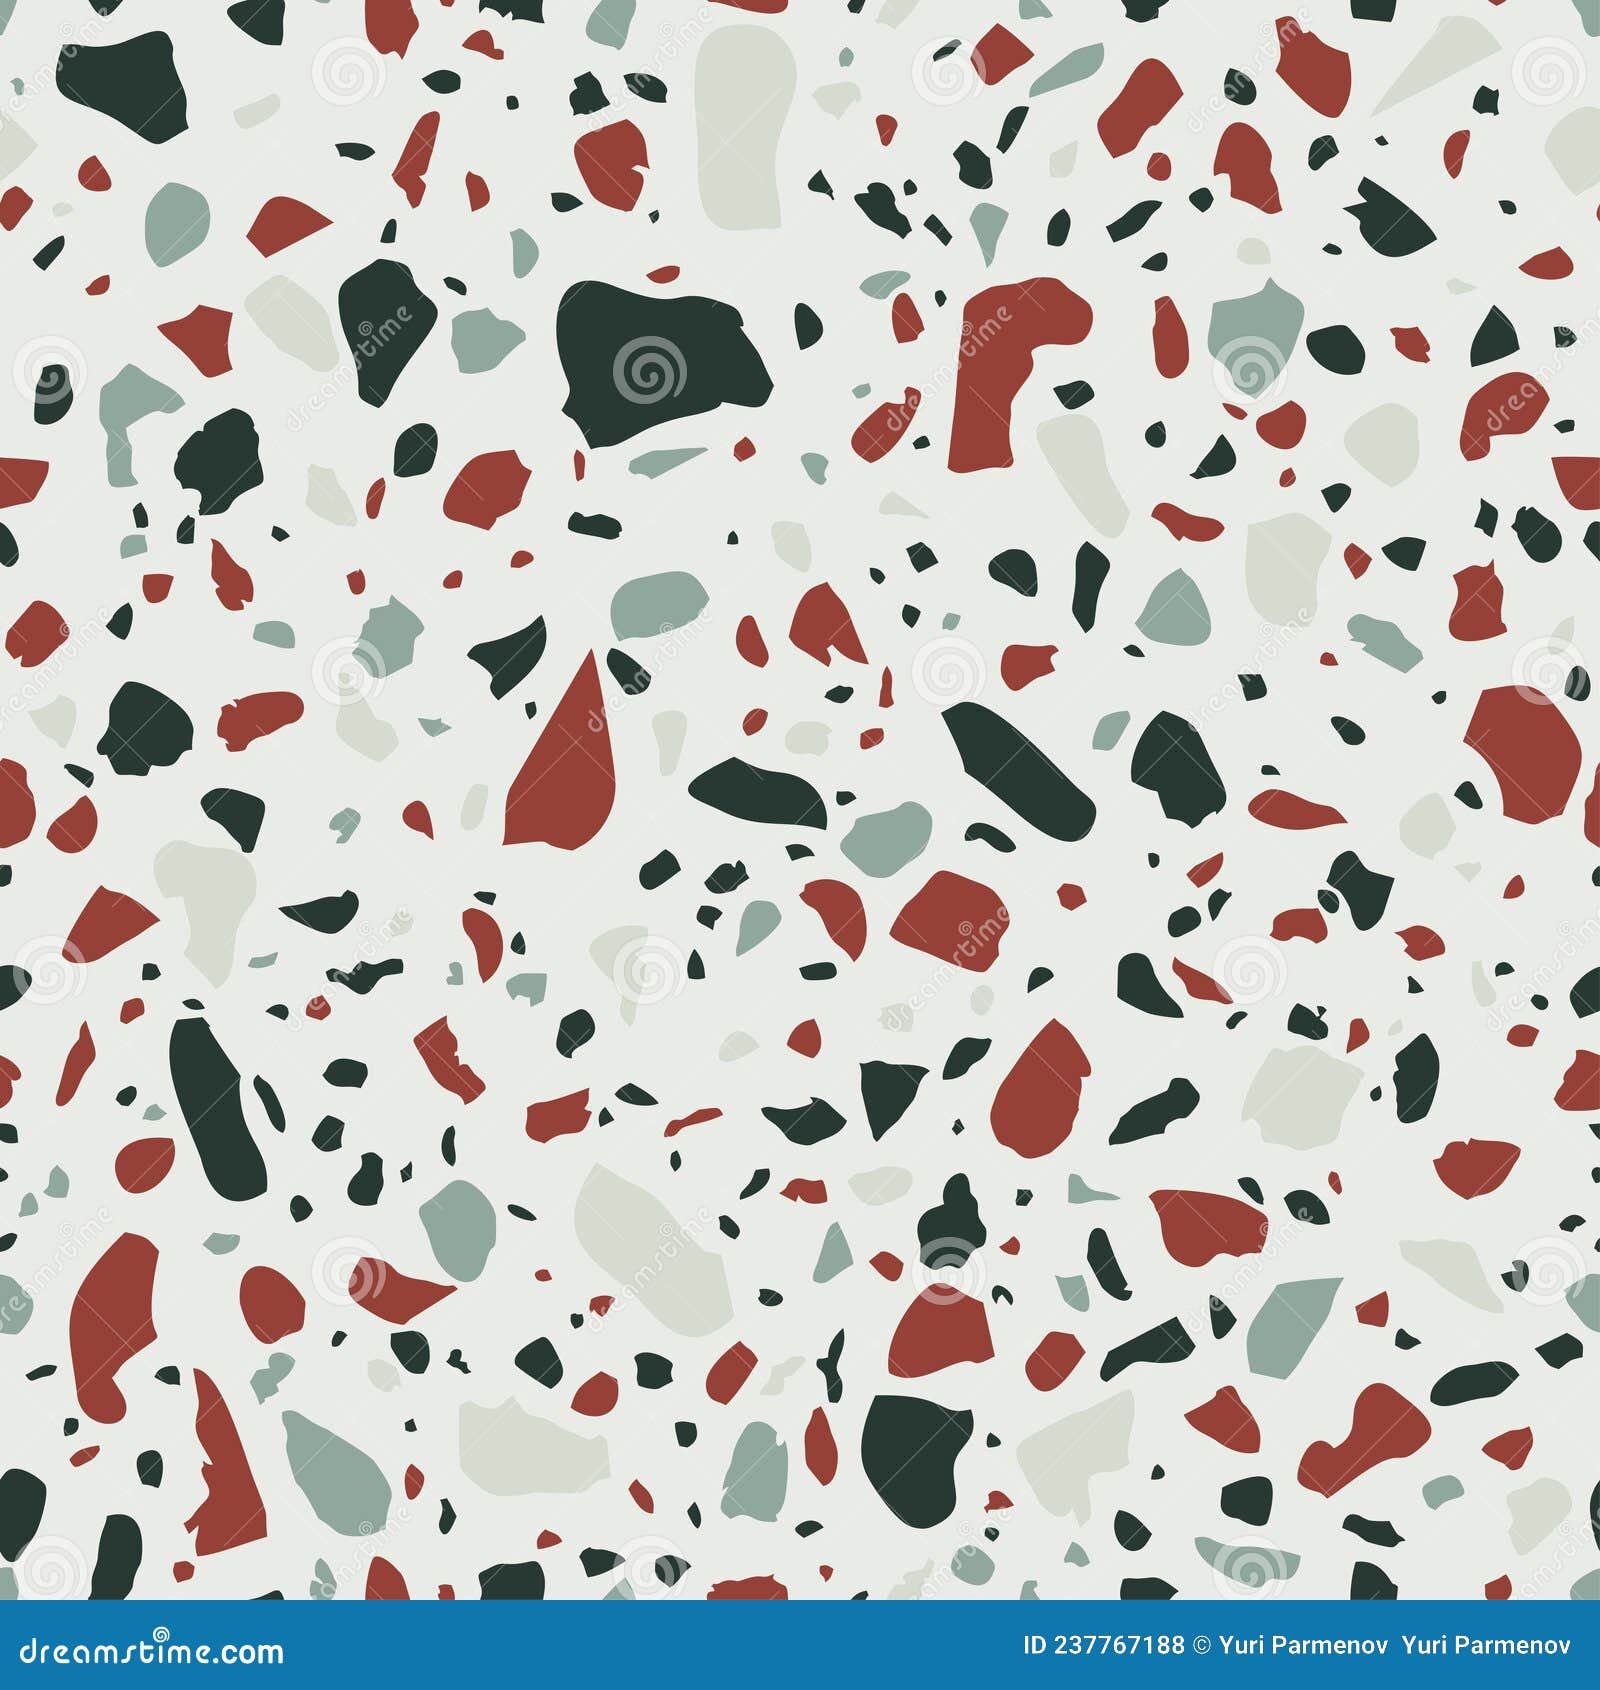 terrazzo flooring. granito tiles of recycled glass, natural stone, quartz, marble chips, cement and concrete. 